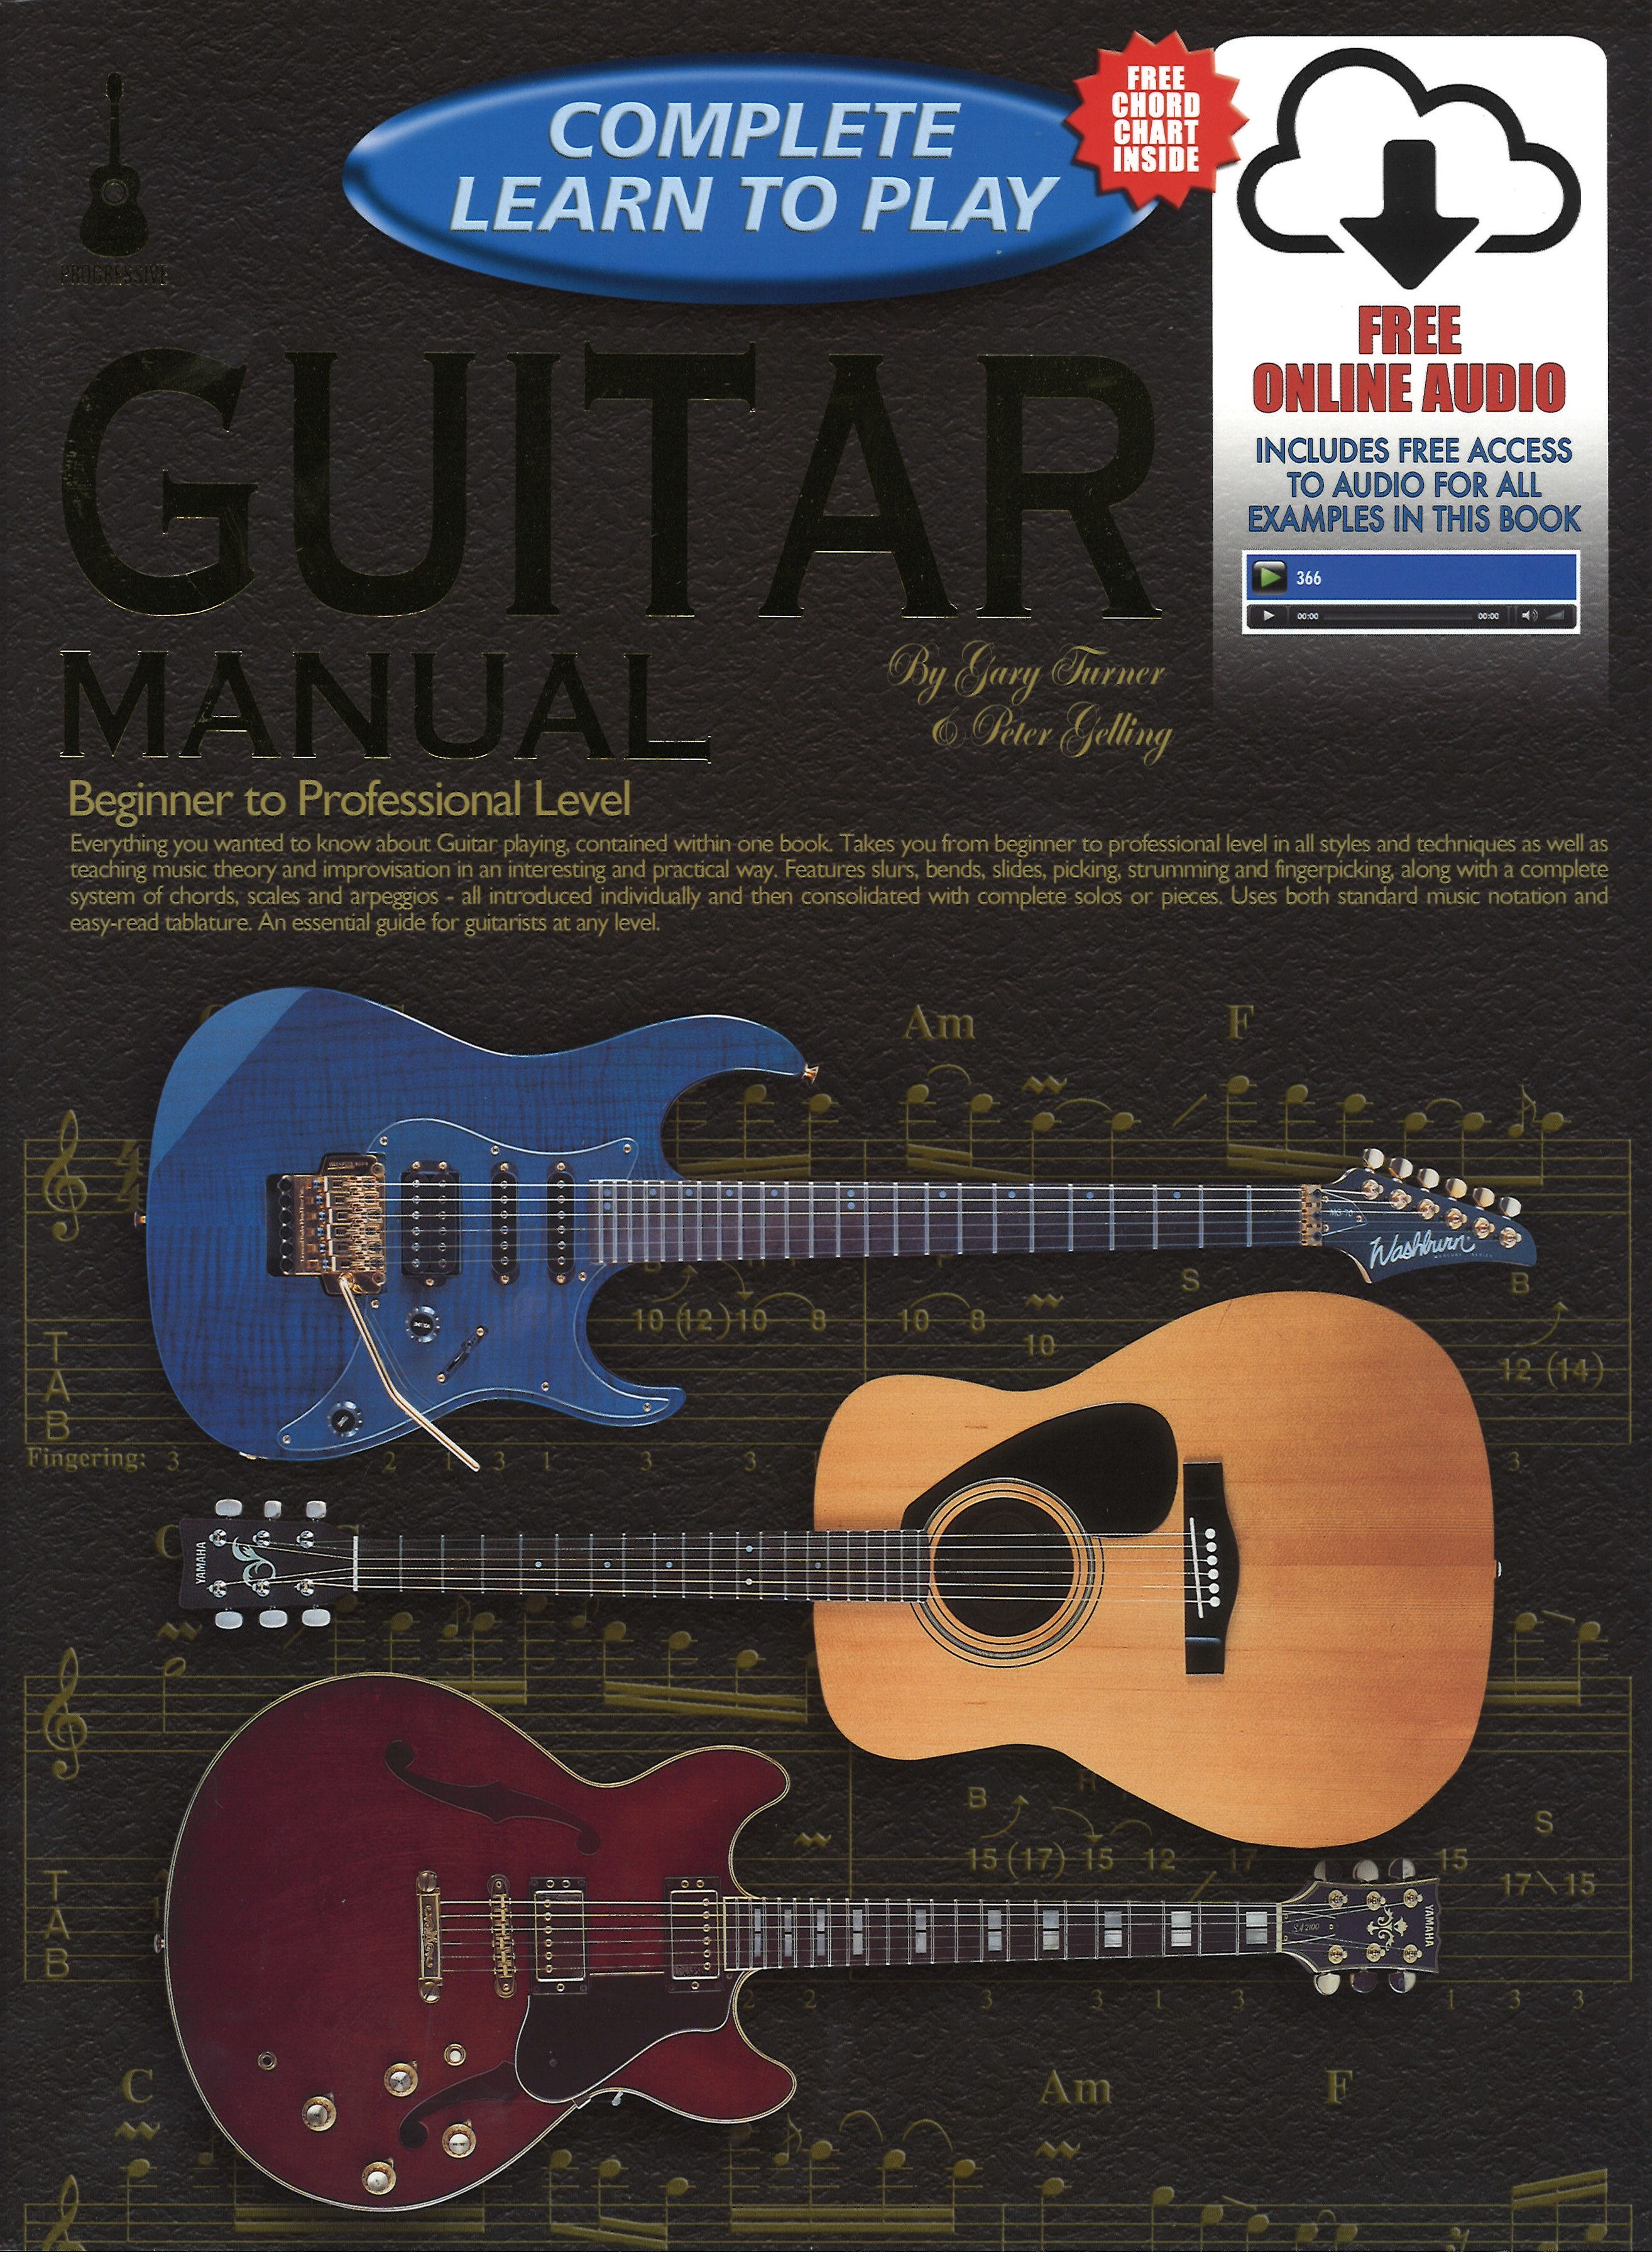 Complete Learn To Play Guitar Manual + Audio Sheet Music Songbook